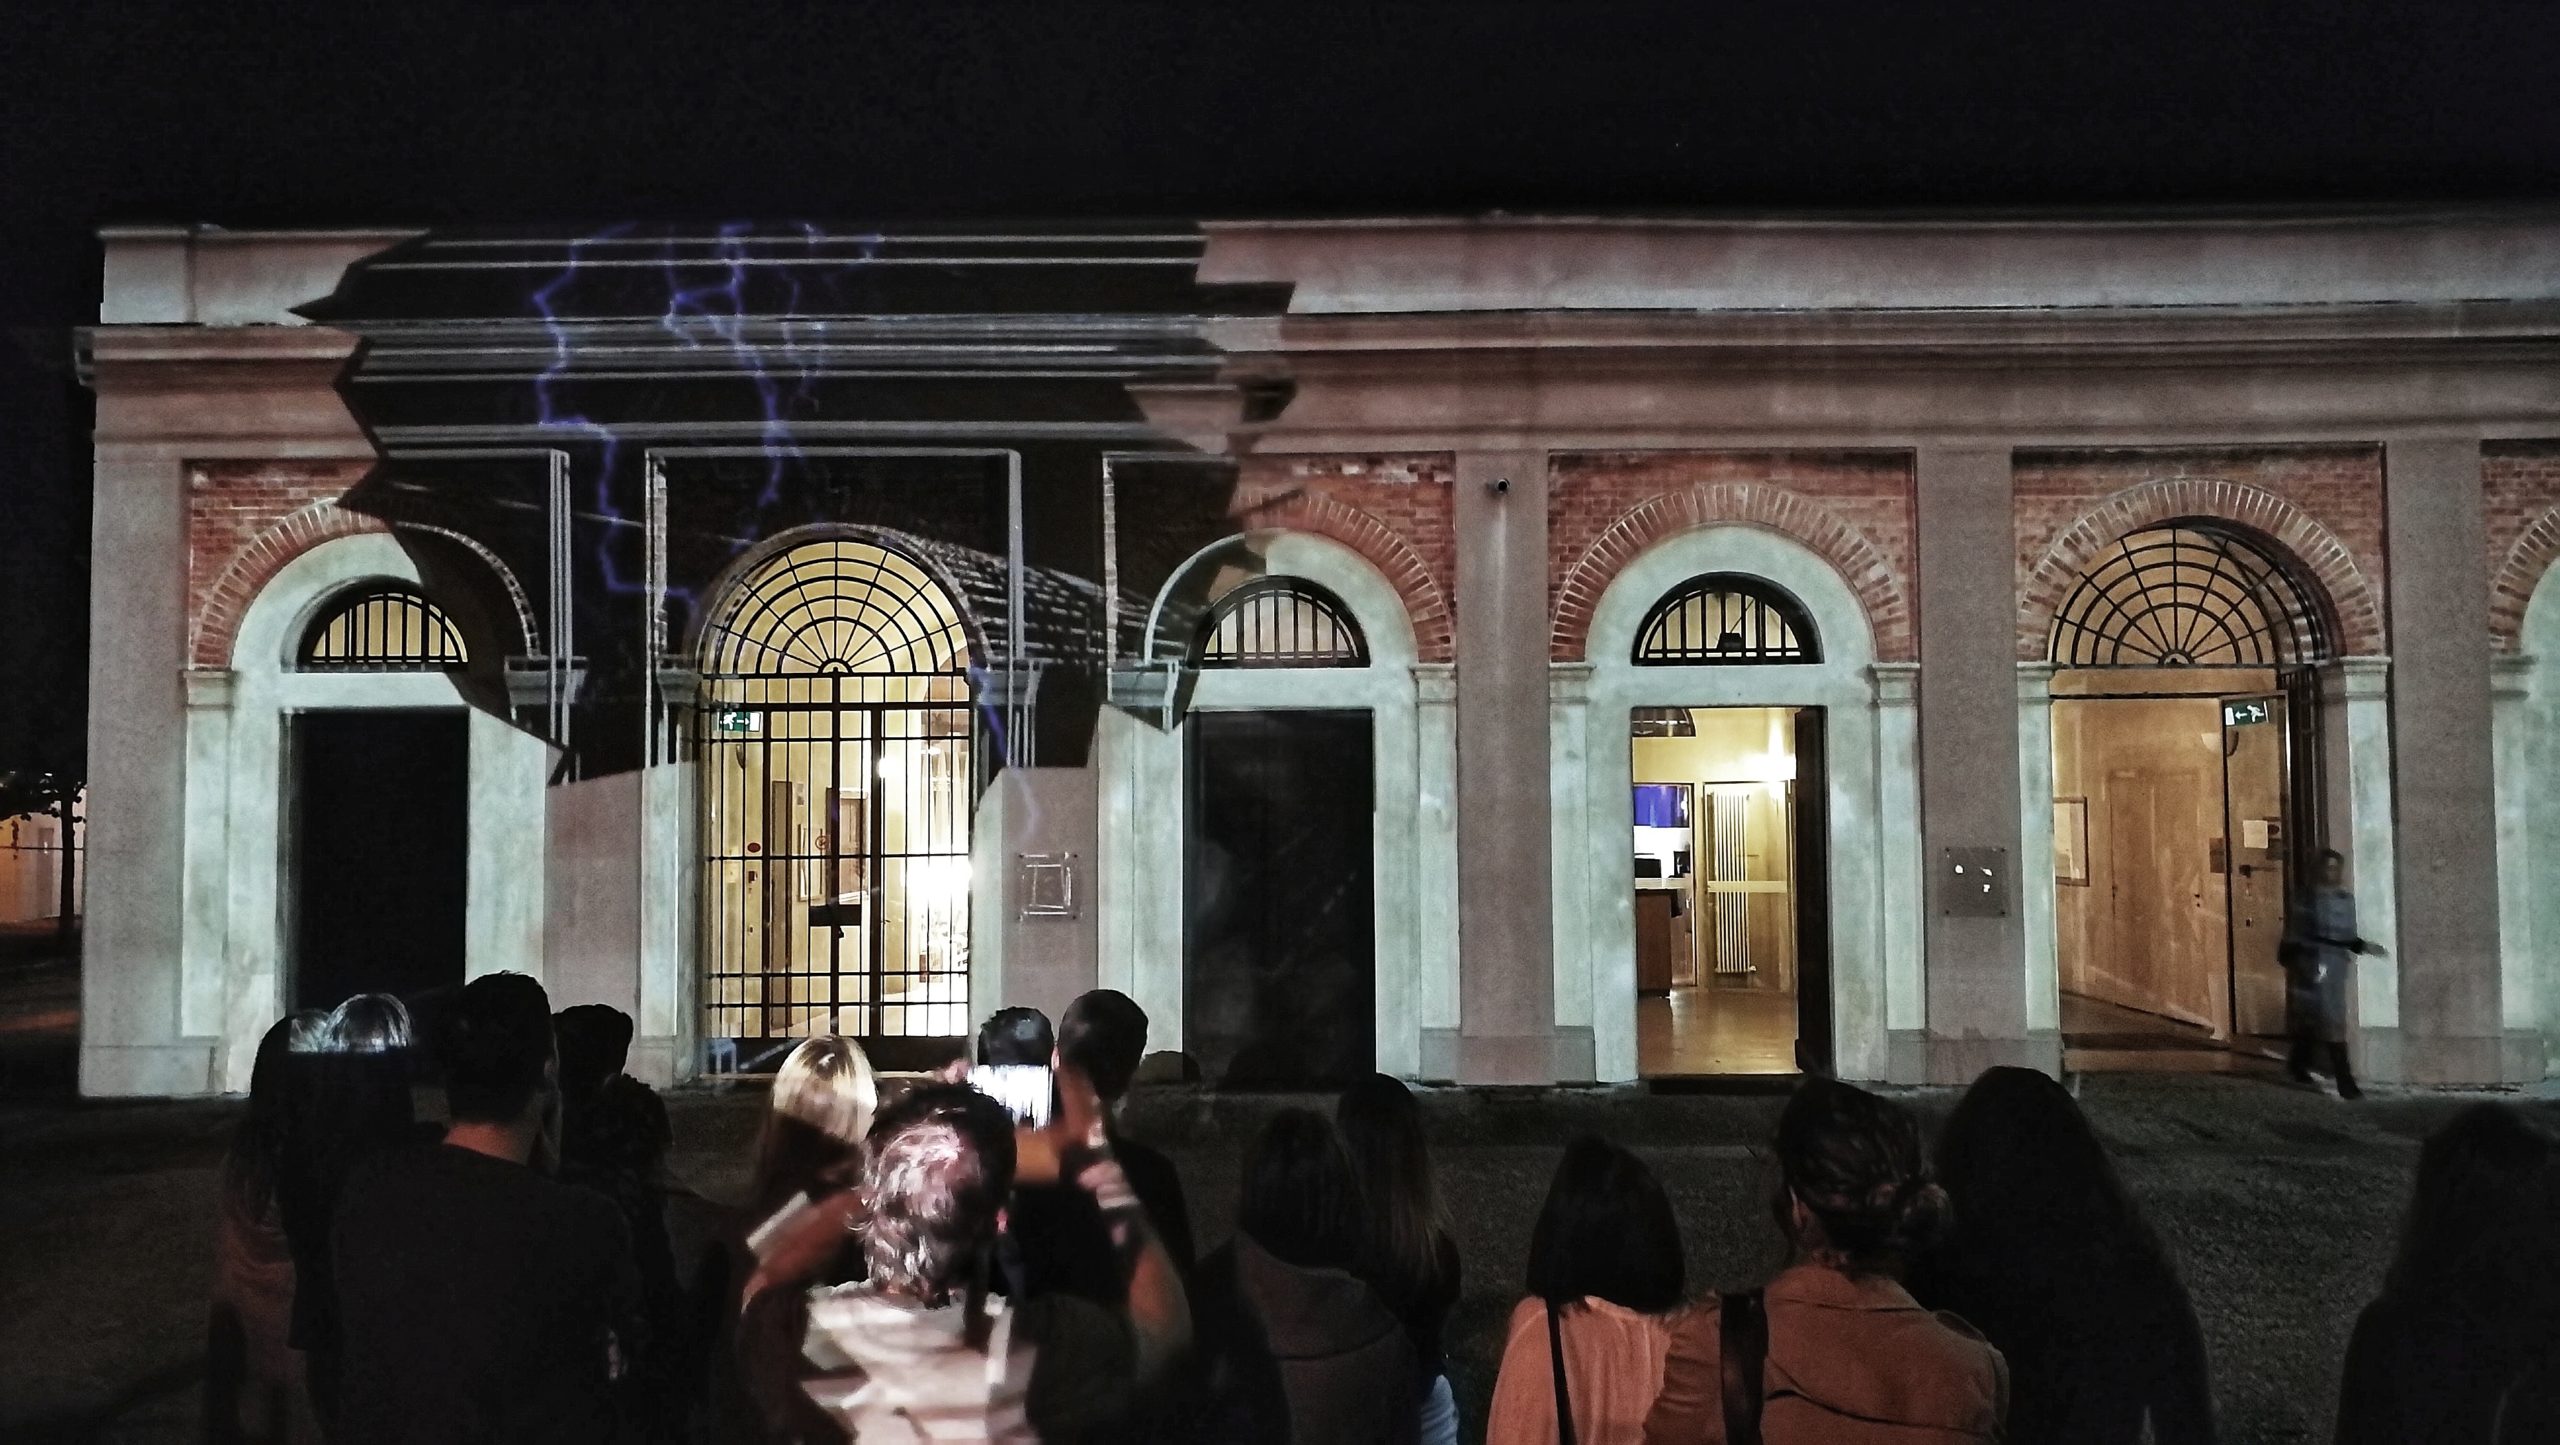 projection mapping in Pisa by Sinapsi videomapping lab